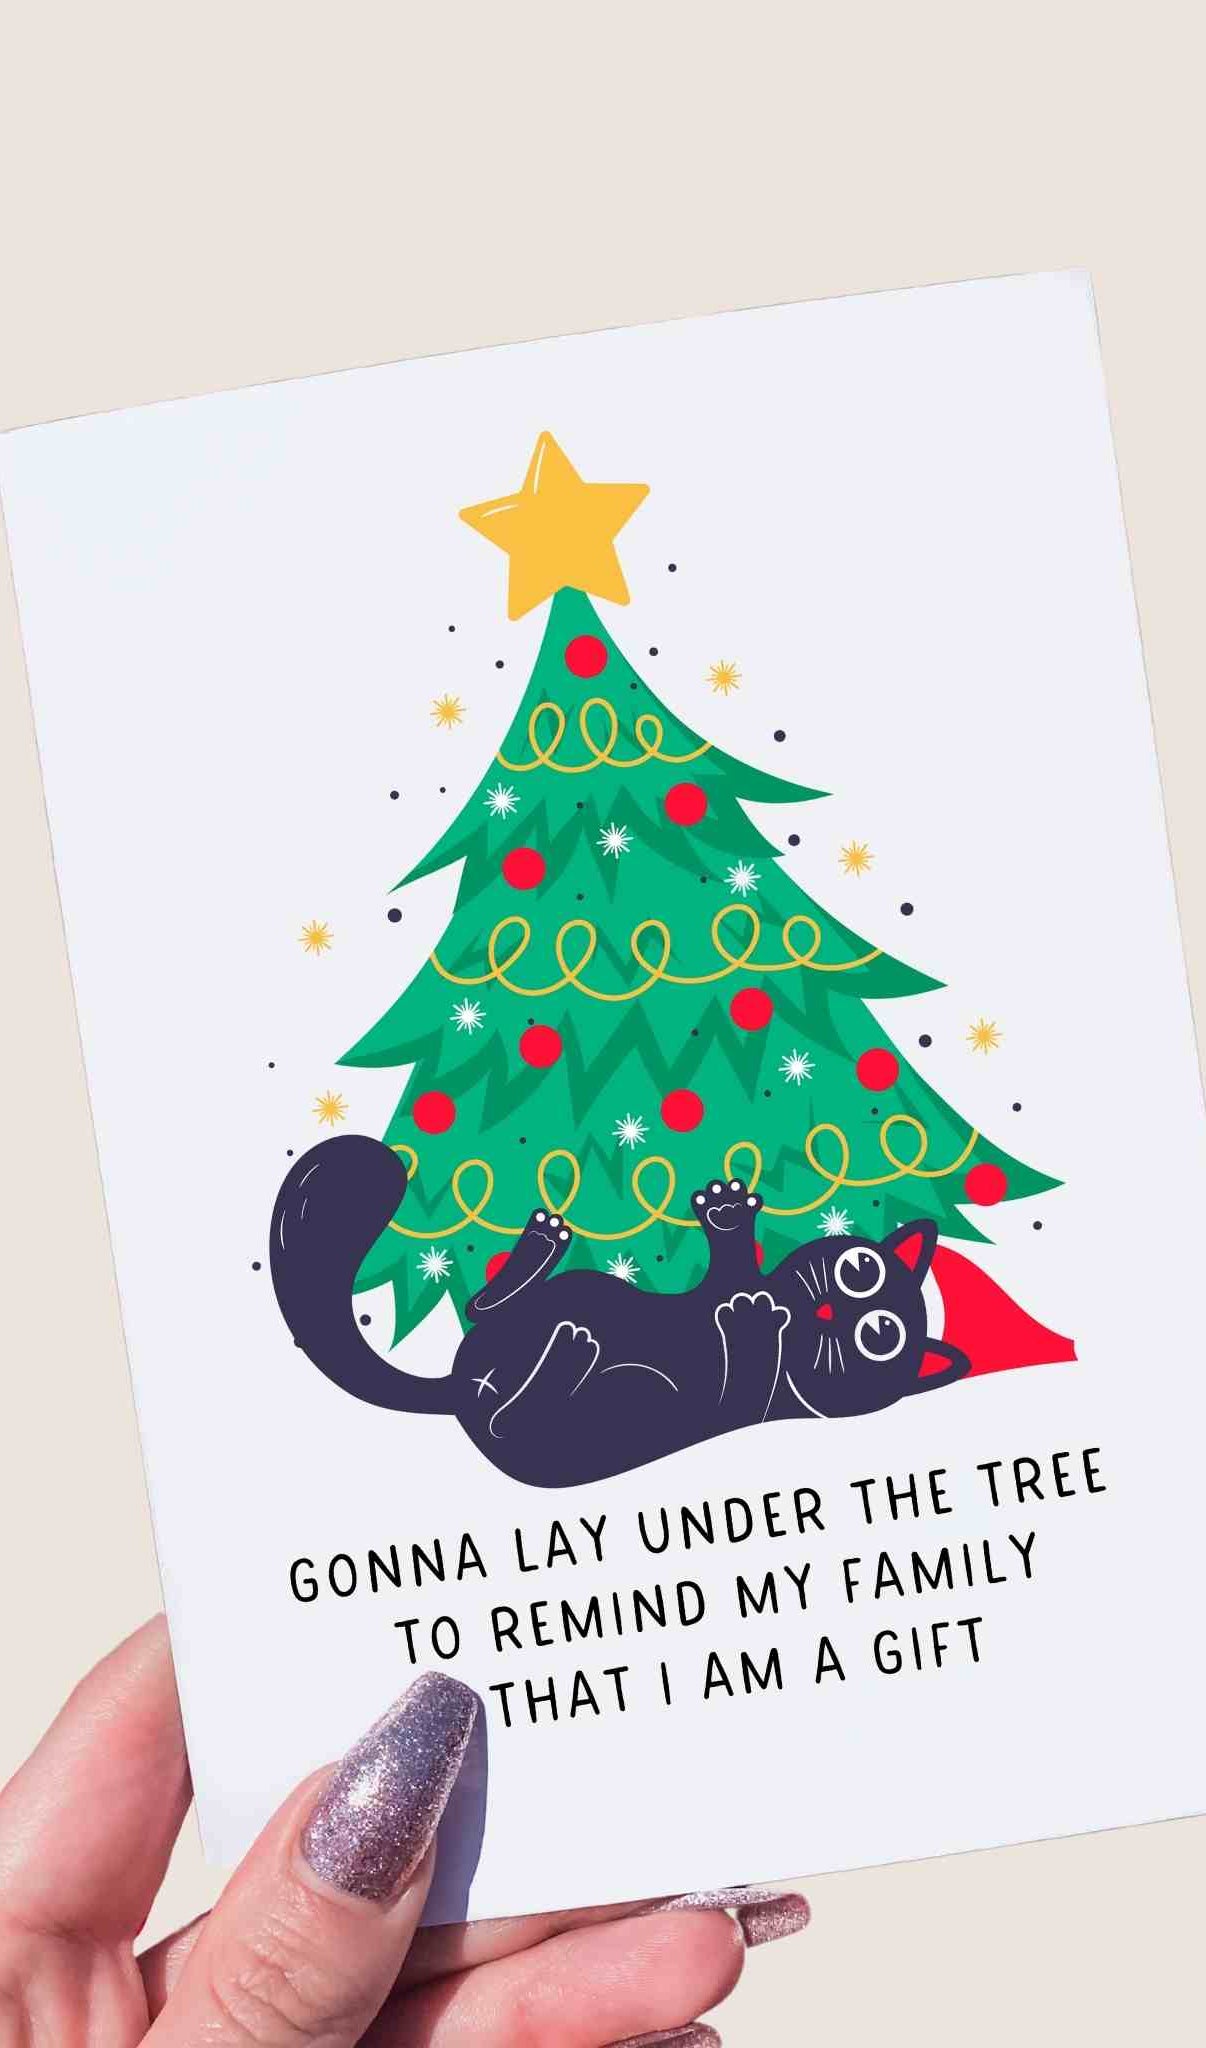 Gonna Go Lay Under The Tree To Remind My Family That I Am A Gift Greeting Card - UntamedEgo LLC.